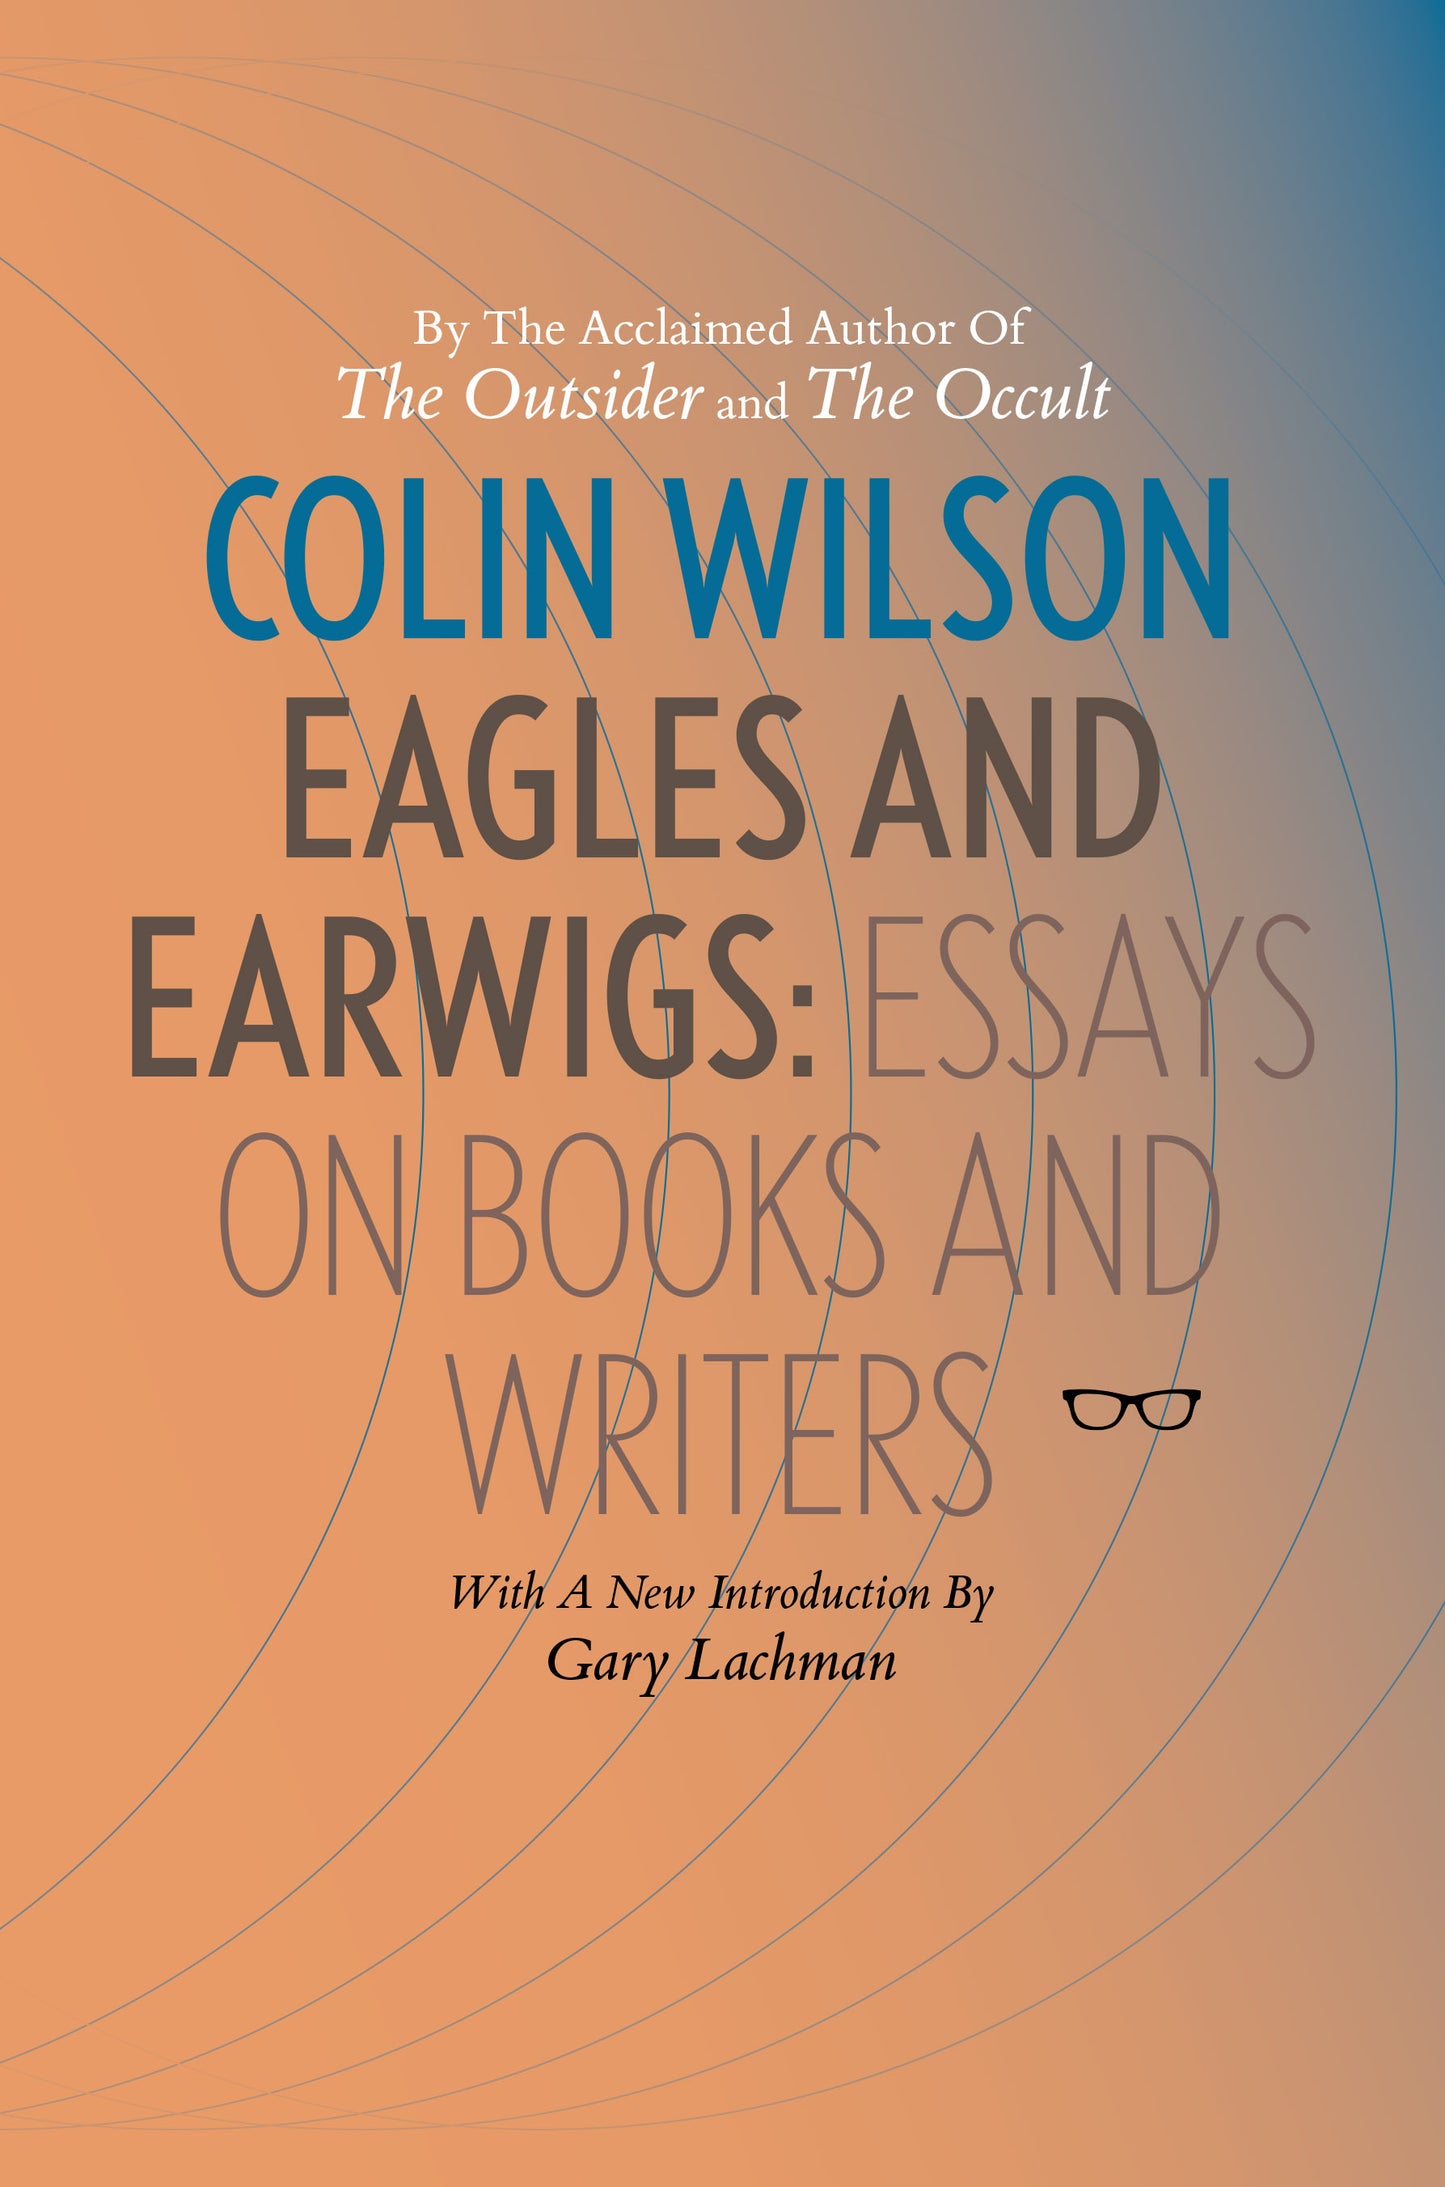 COLIN WILSON'S Eagles and Earwigs - Essays on Books and Writers